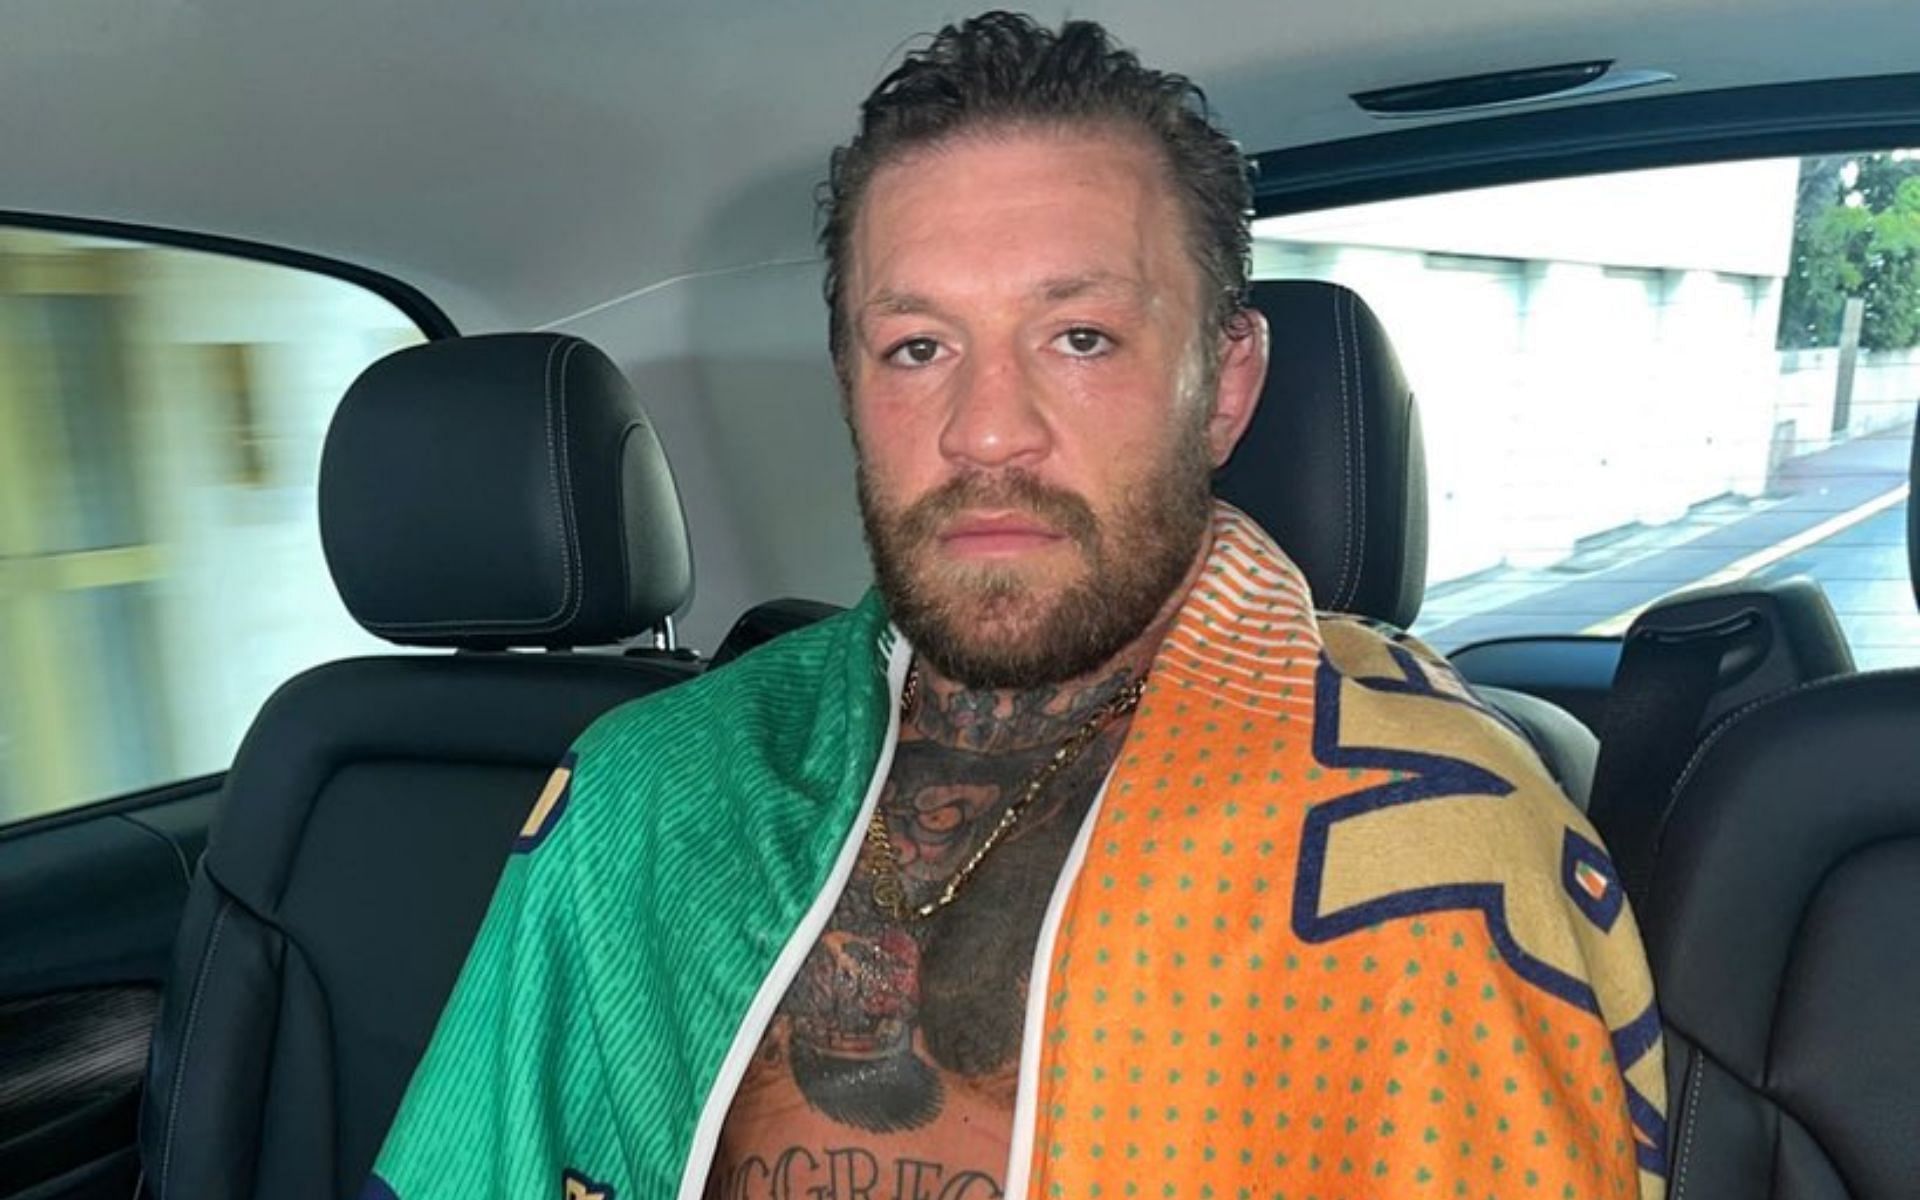 Conor McGregor may have gone too far with his trash talk towards Khabib Nurmagomedov [Image Credit: @TheNotoriousMMA on Twitter]